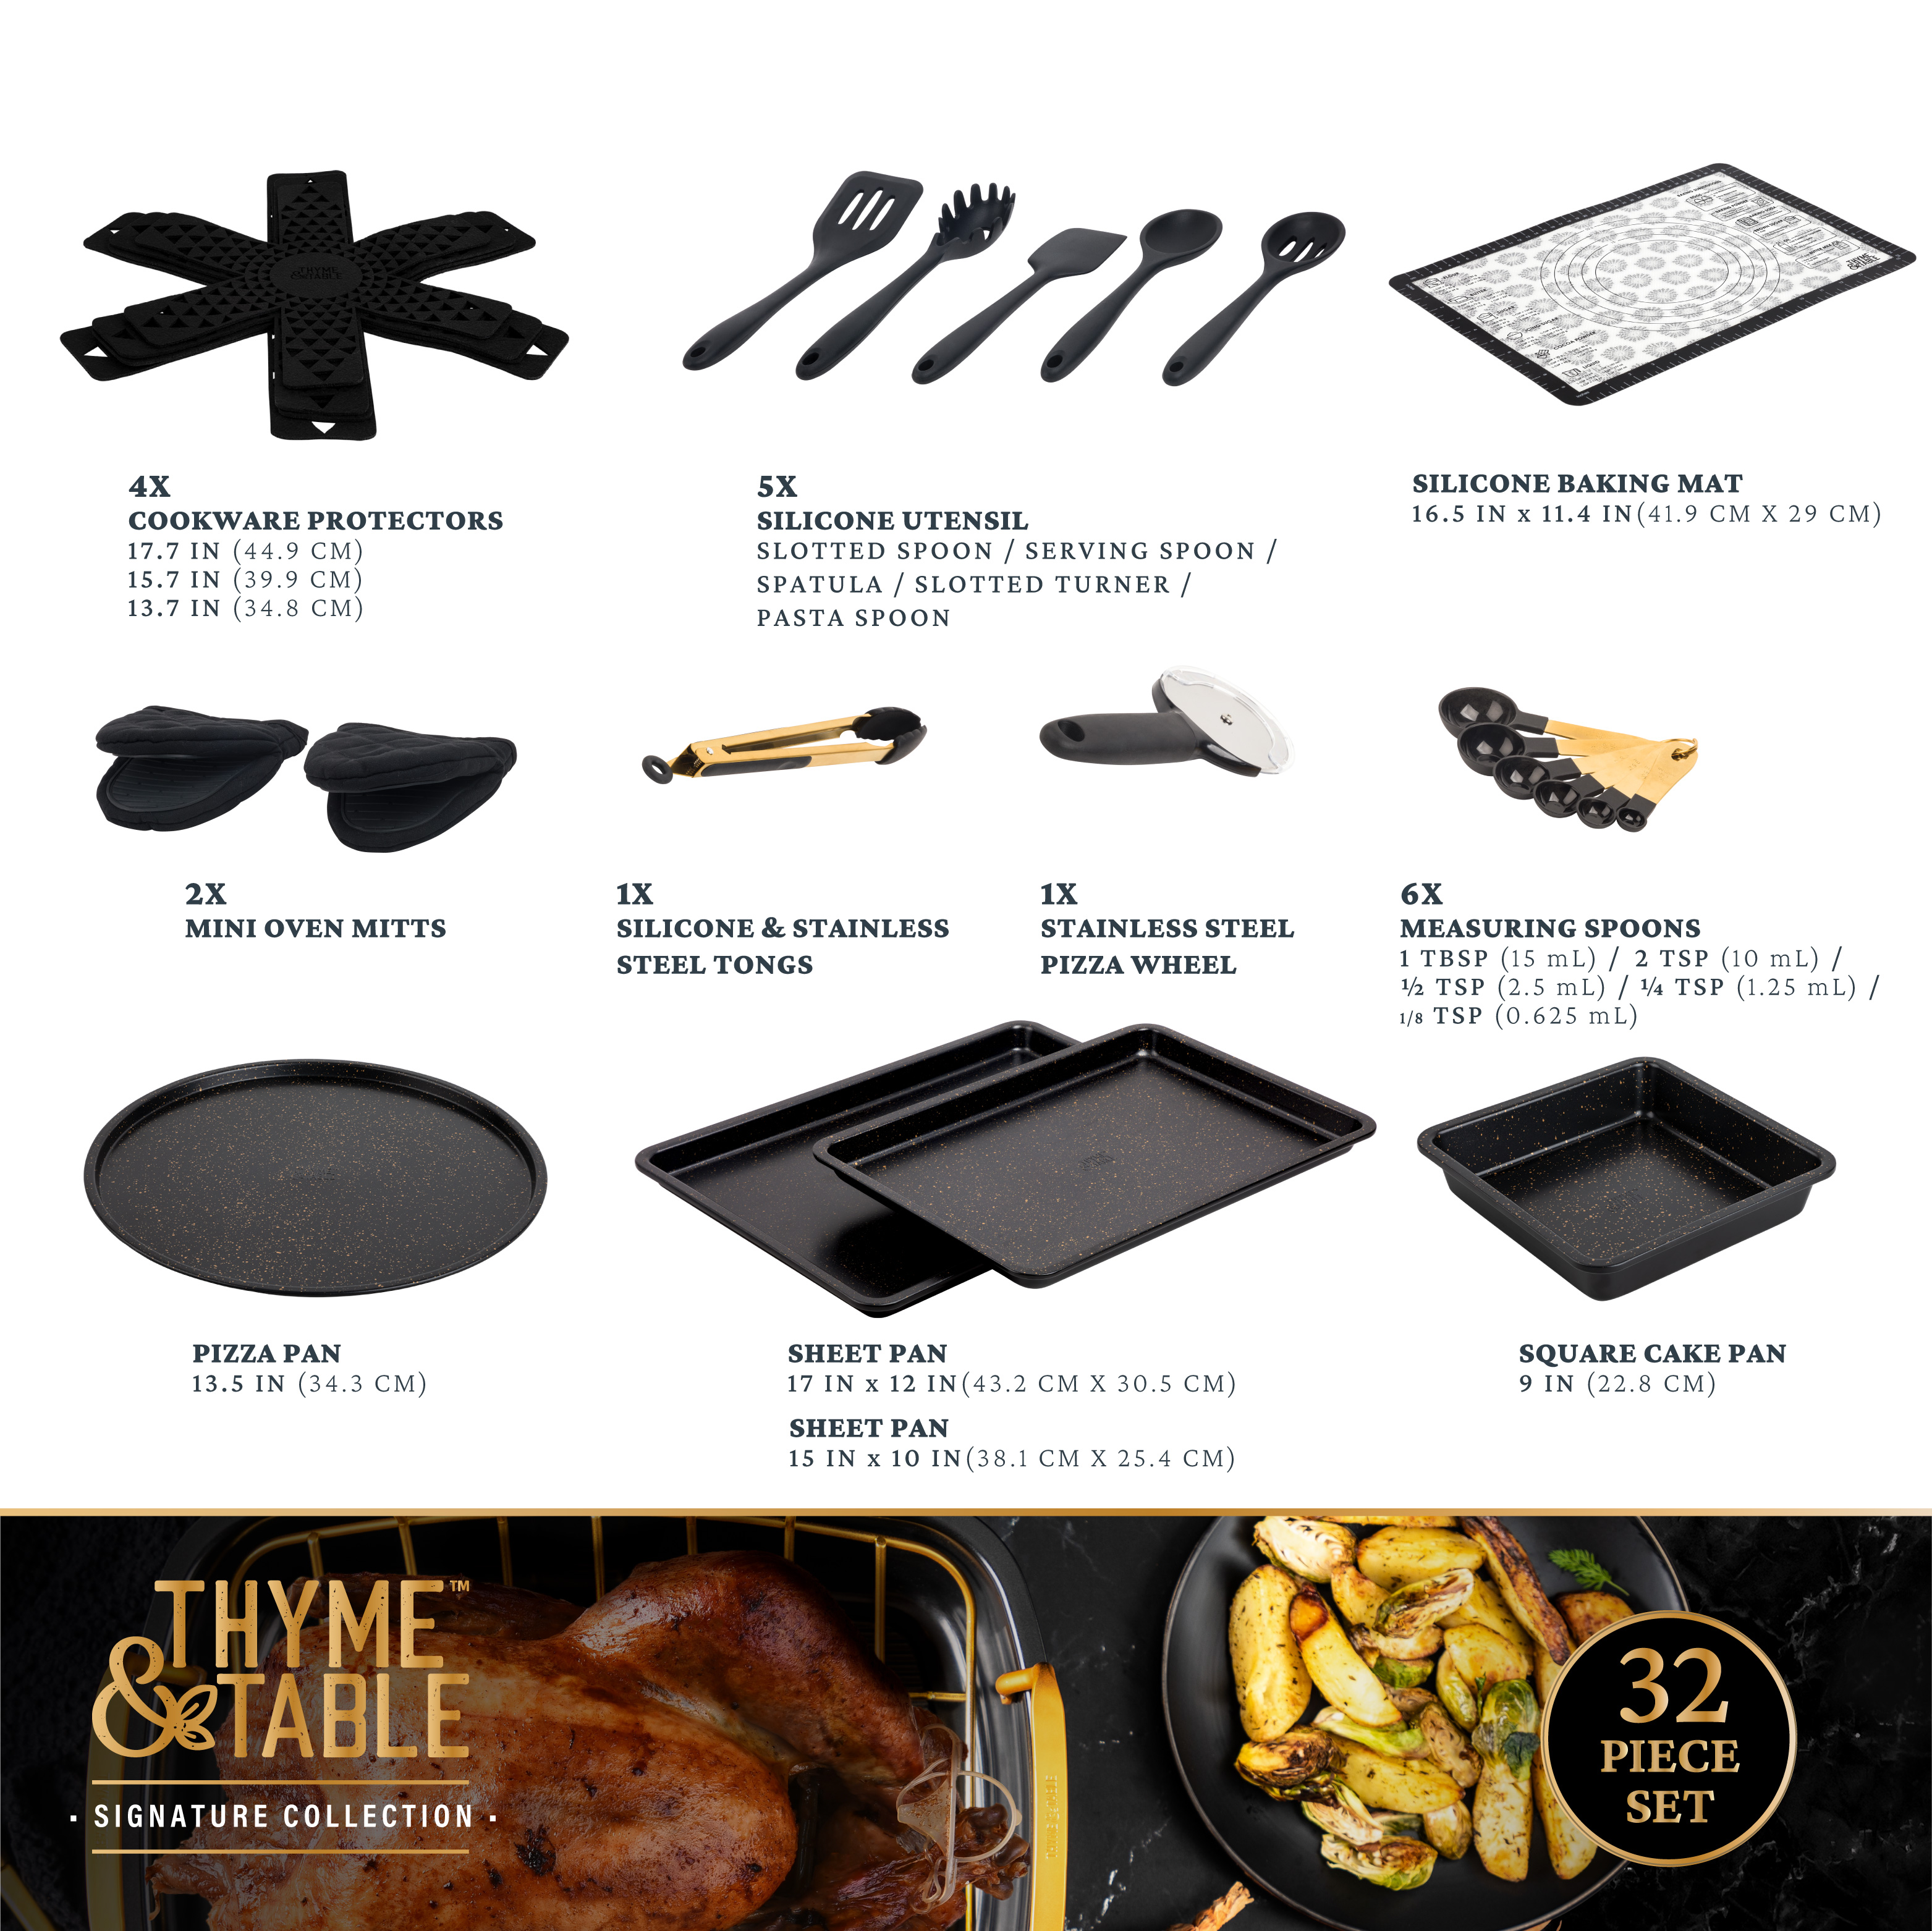 Thyme & Table 32-Piece Cookware & Bakeware Non-Stick Set, Black - image 3 of 6